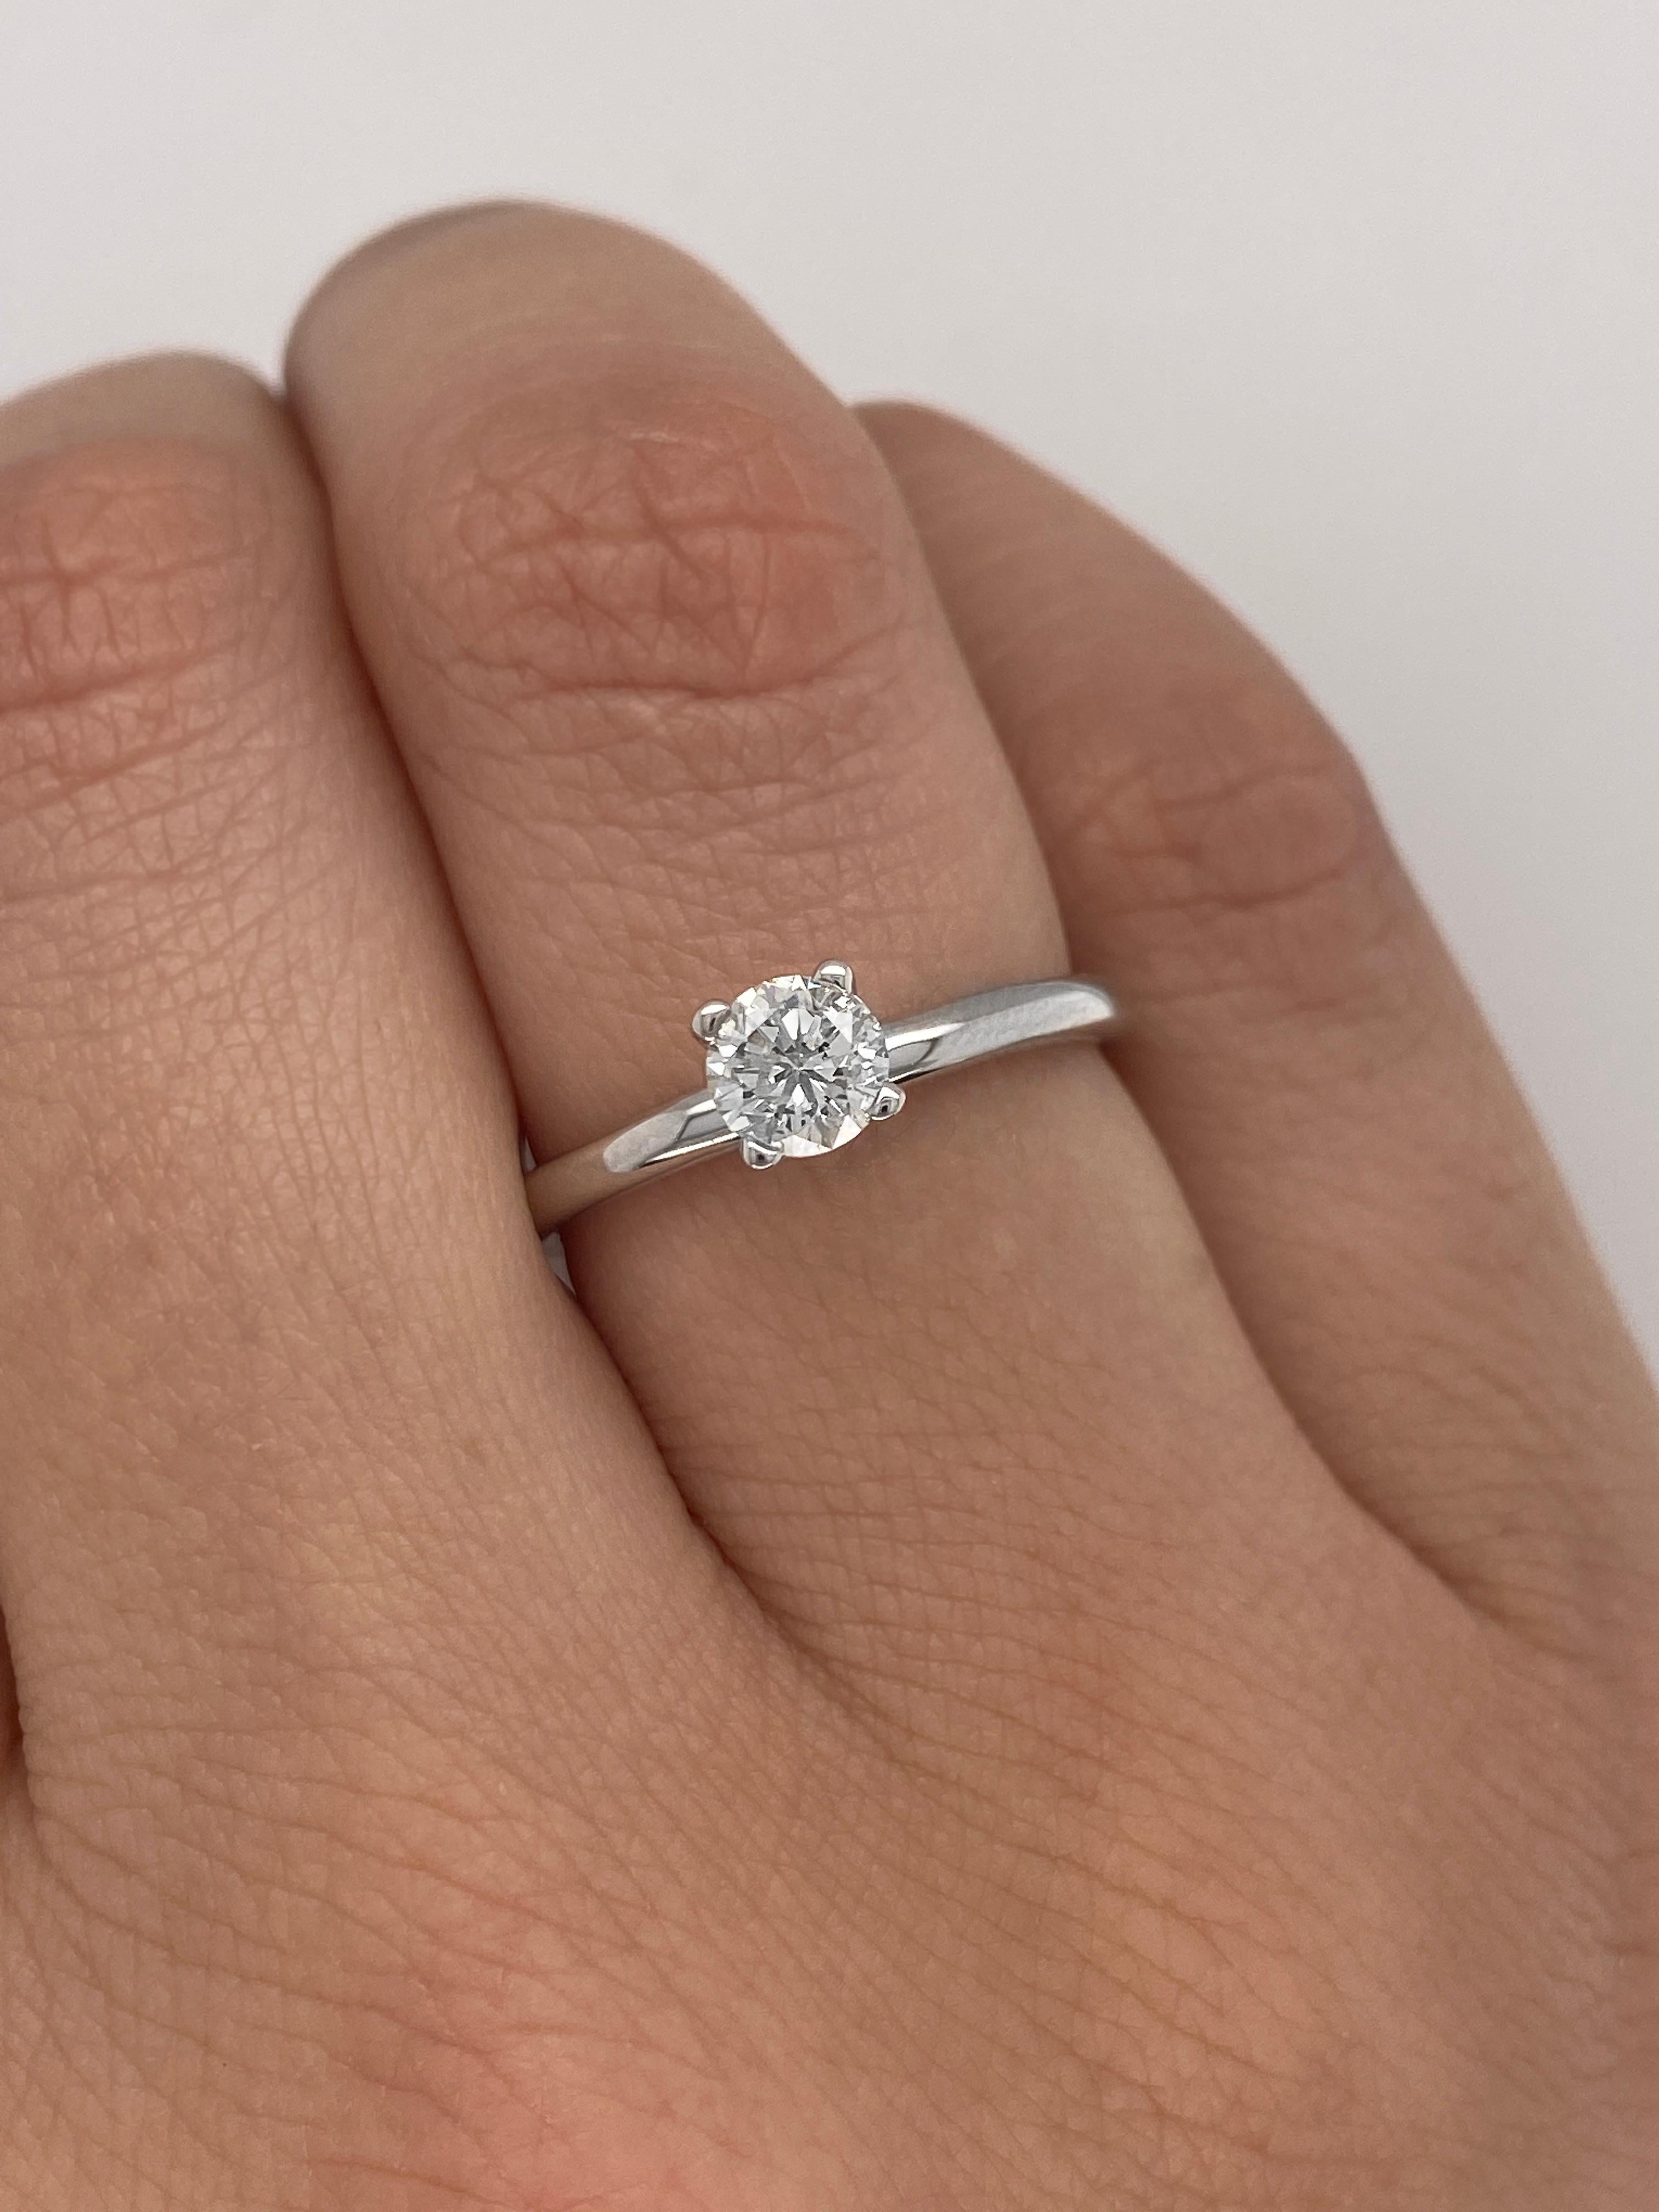 For Sale:  0.50 Ct Natural Round Cut Diamond Engagement Ring 14K White Gold 2